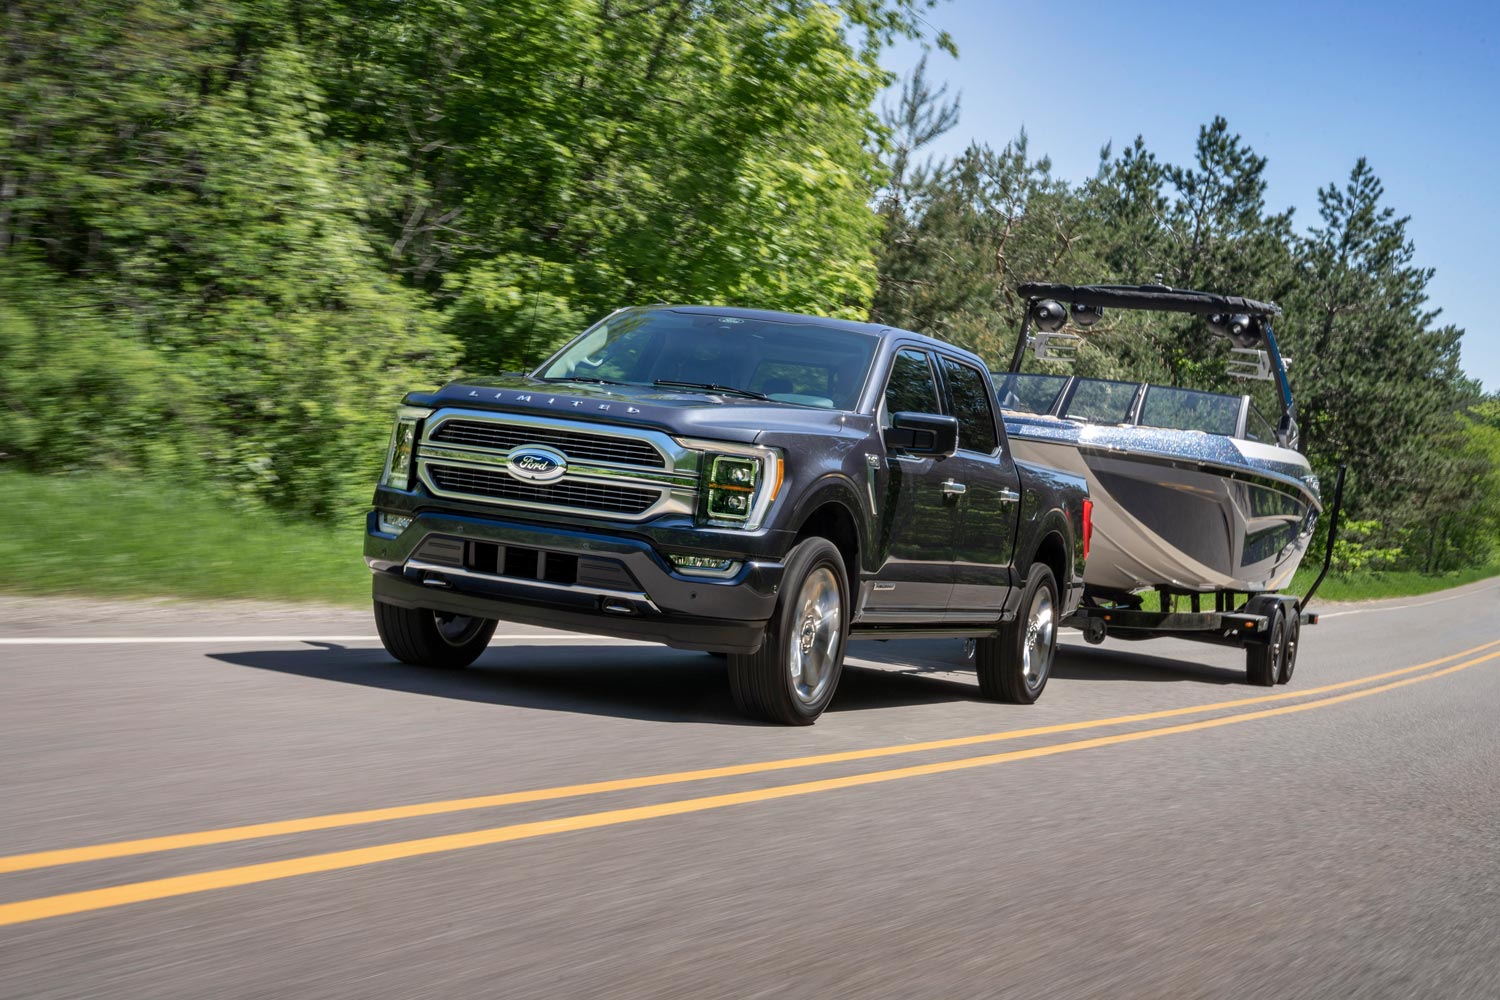 Ford F-150 towing a trailer and a ski boat on a two-lane road.